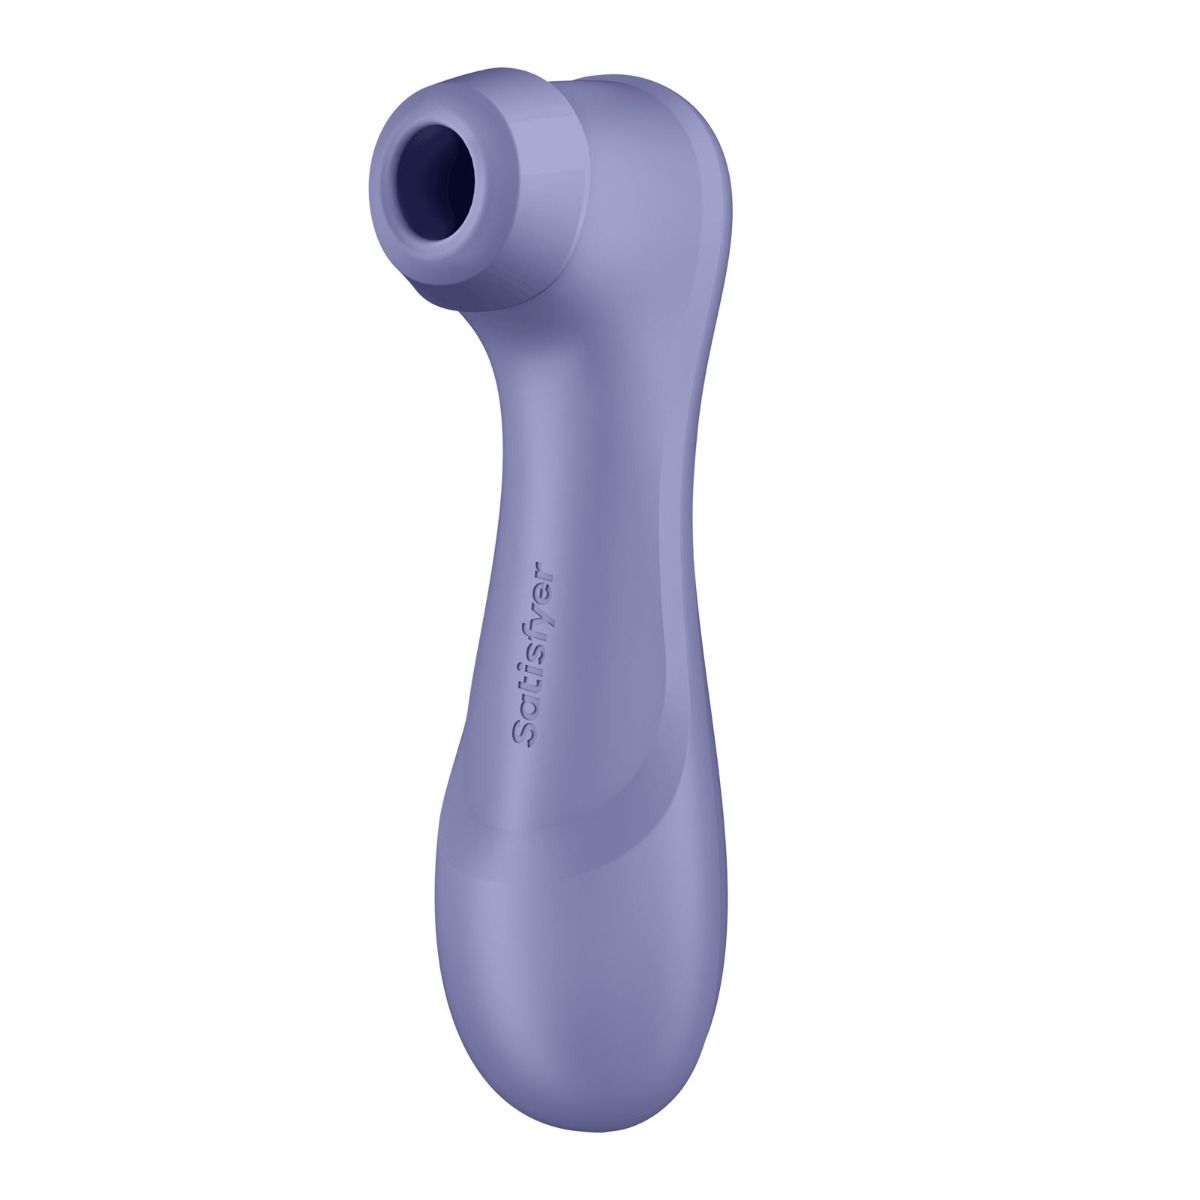 Pro 2 Generation 3 with Liquid Air Technology Vibration and Bluetooth/App lilac